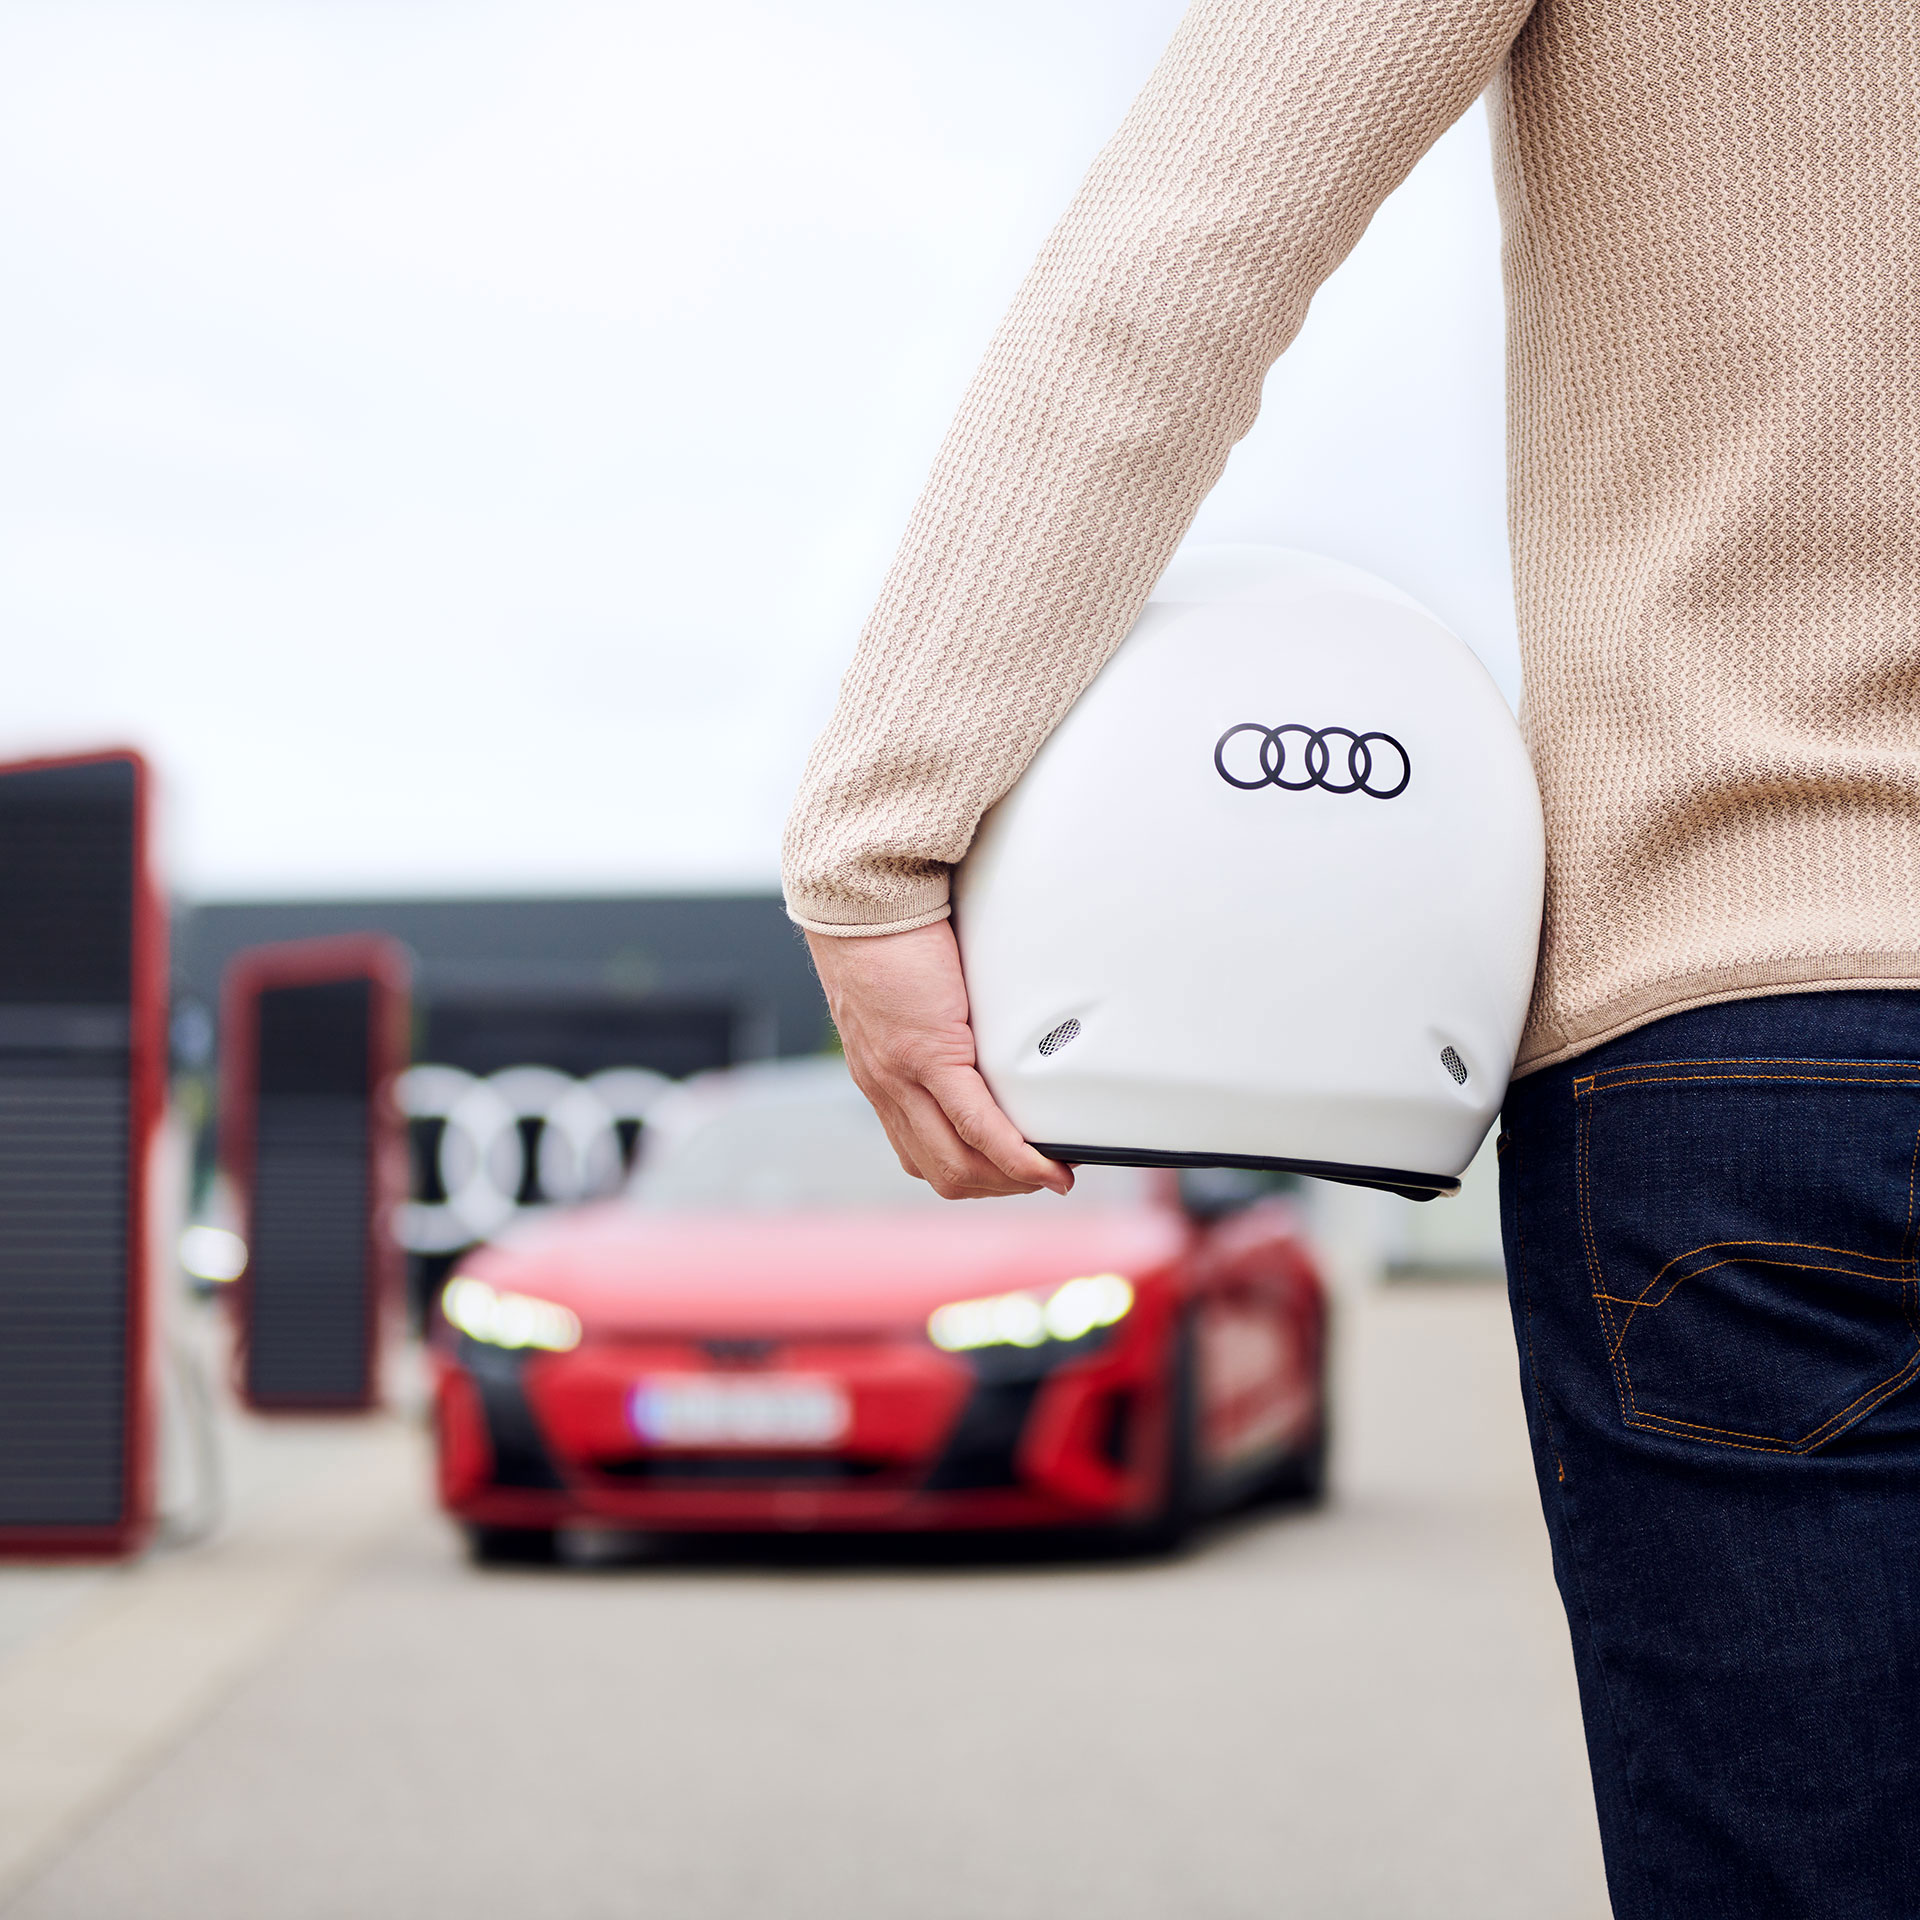 Rear view of someone holding a white helmet with Audi logo, in the background blurred a red Audi model